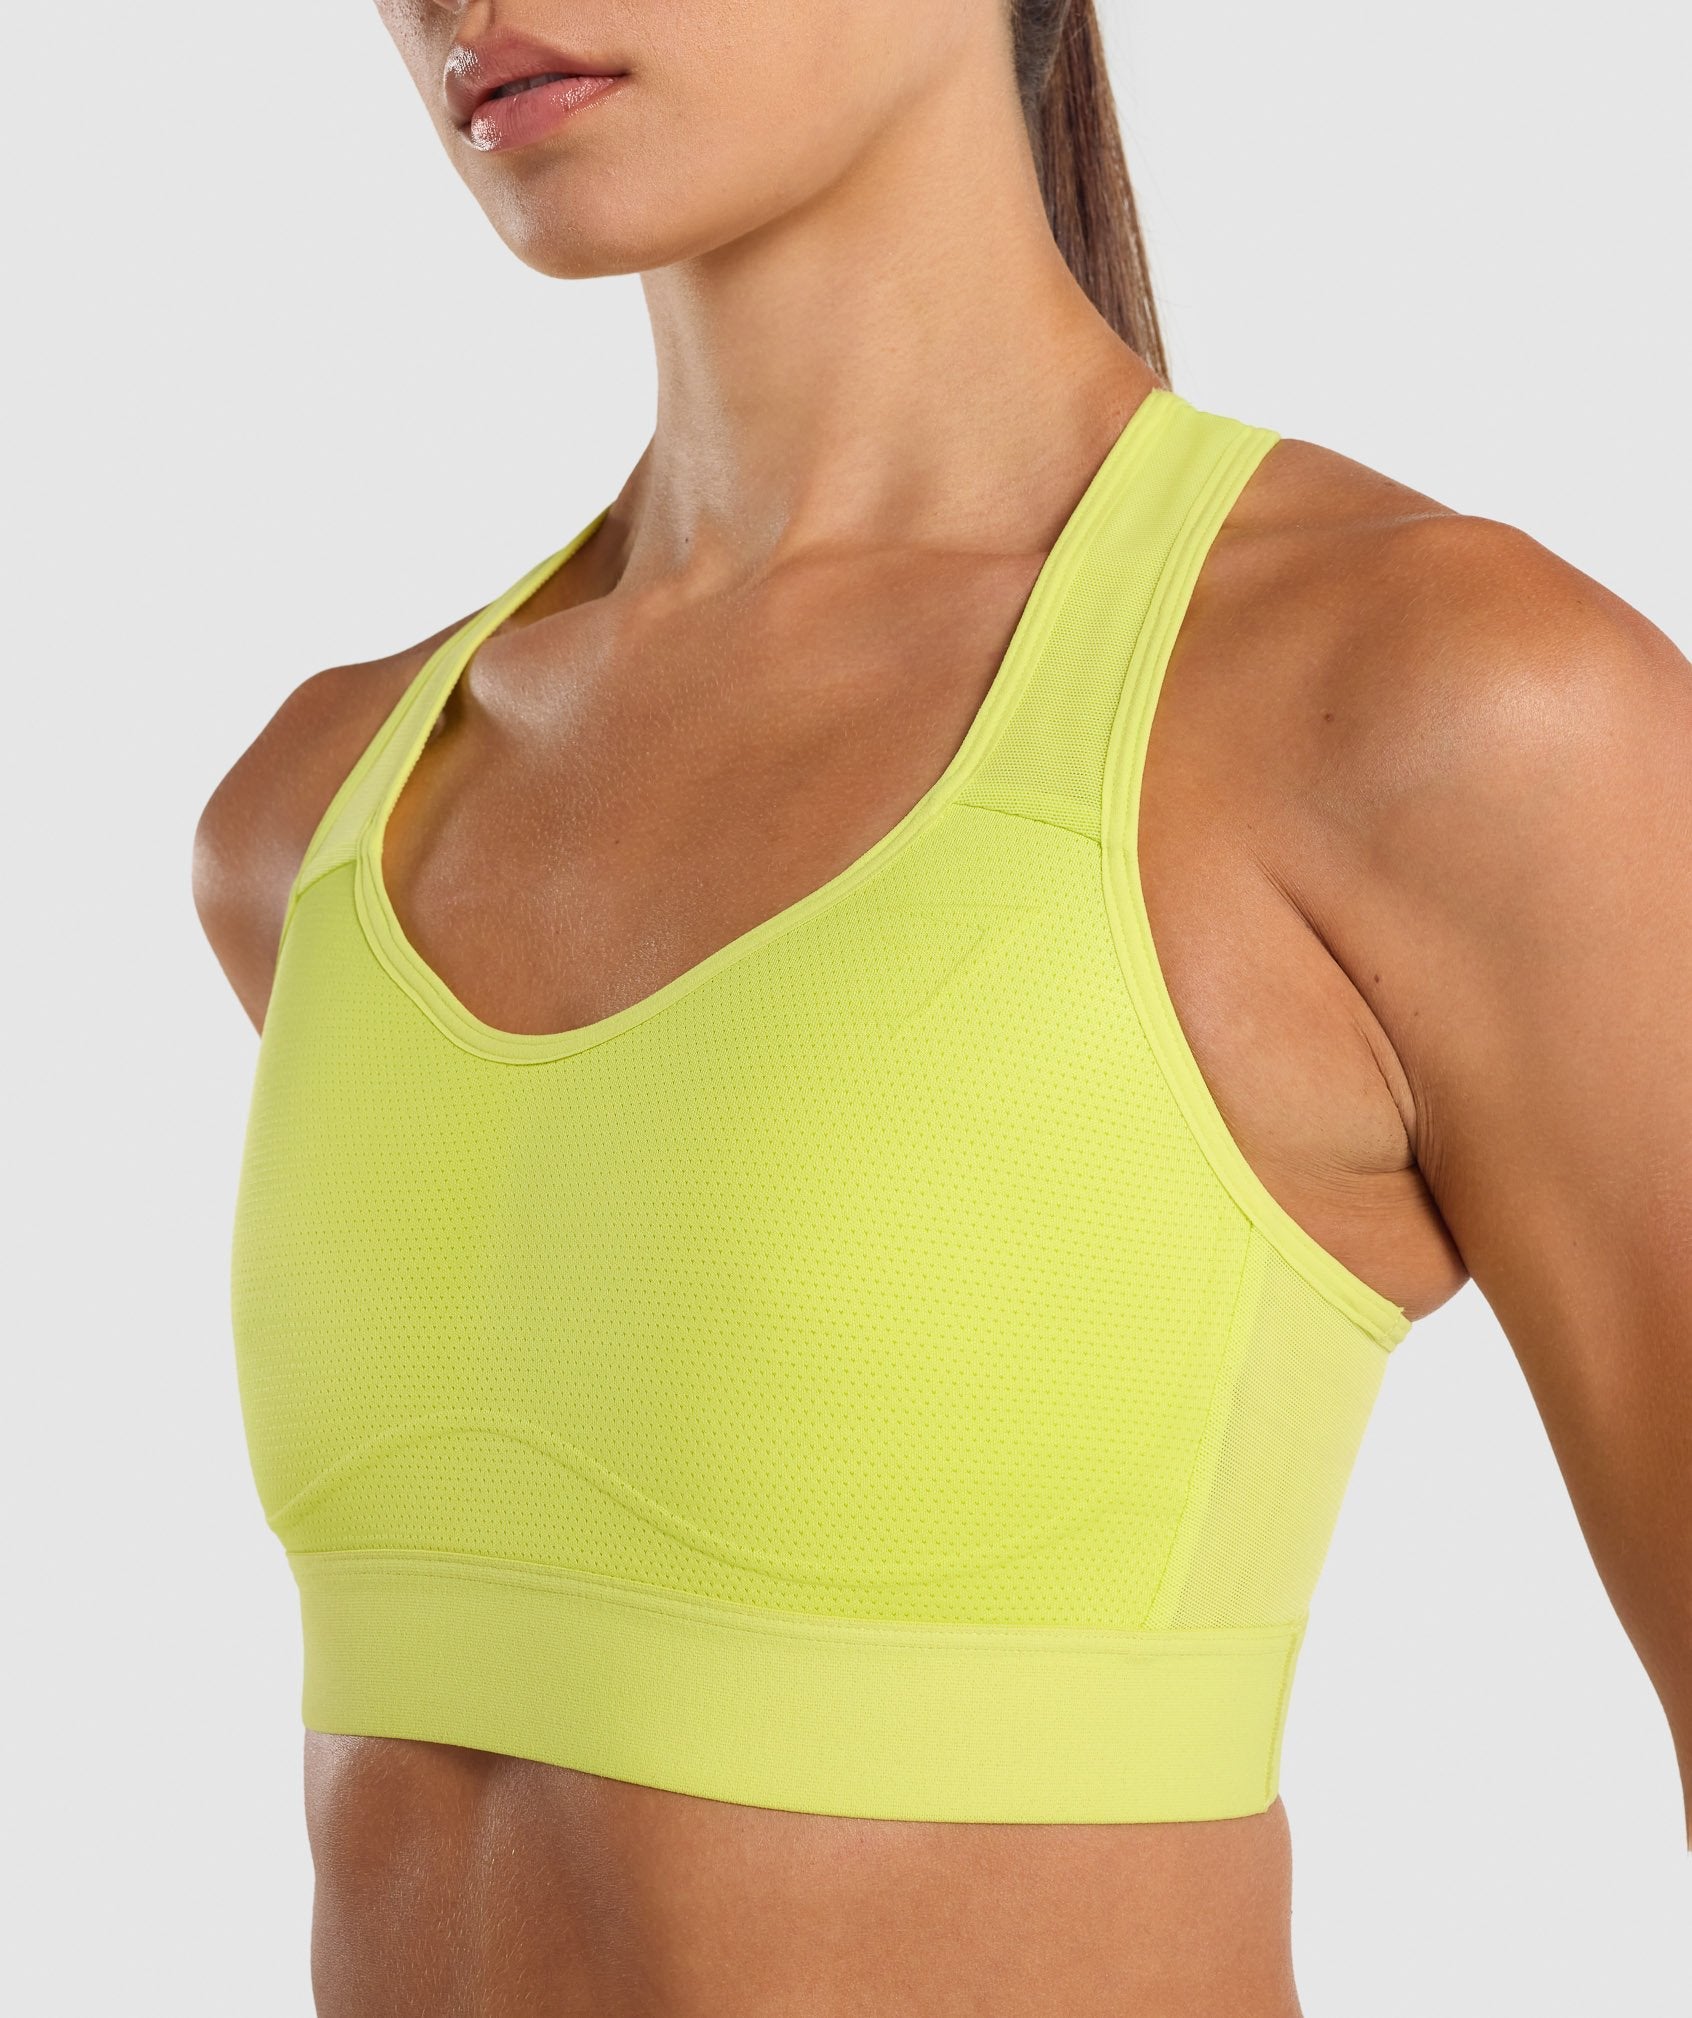 Lightweight High Support Sports Bra in Yellow - view 6